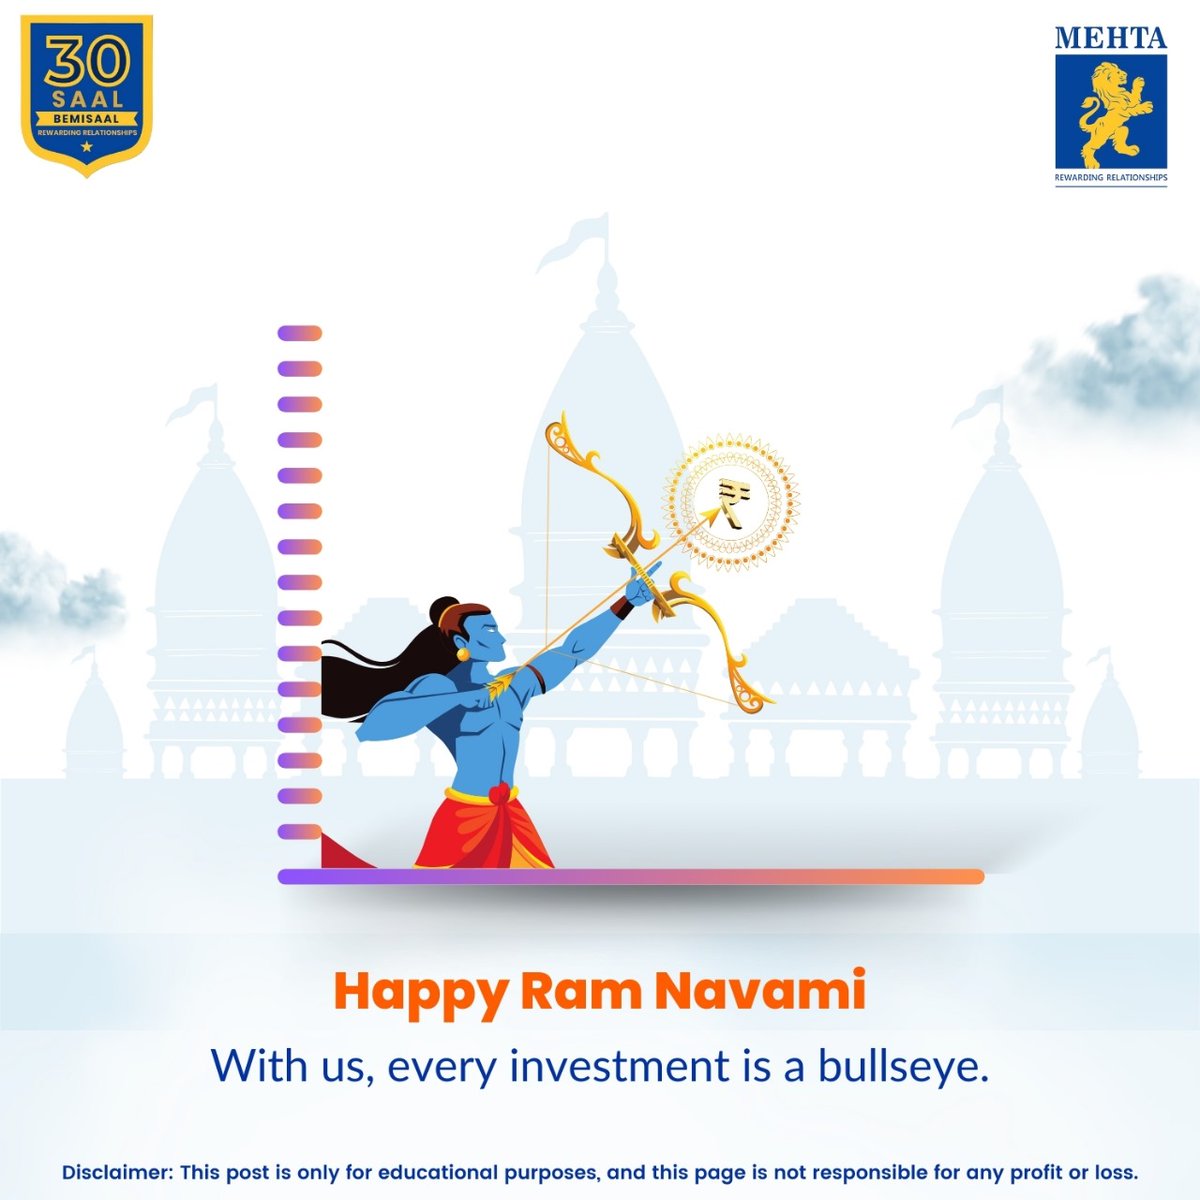 May Lord Rama brings Peace, prosperity, and financial security in your life this Ram Navami.
.
.
#mehtaequities #ramnavmi #investmentopportunities #investmentstrategies #investingtips #30saalbemisaal